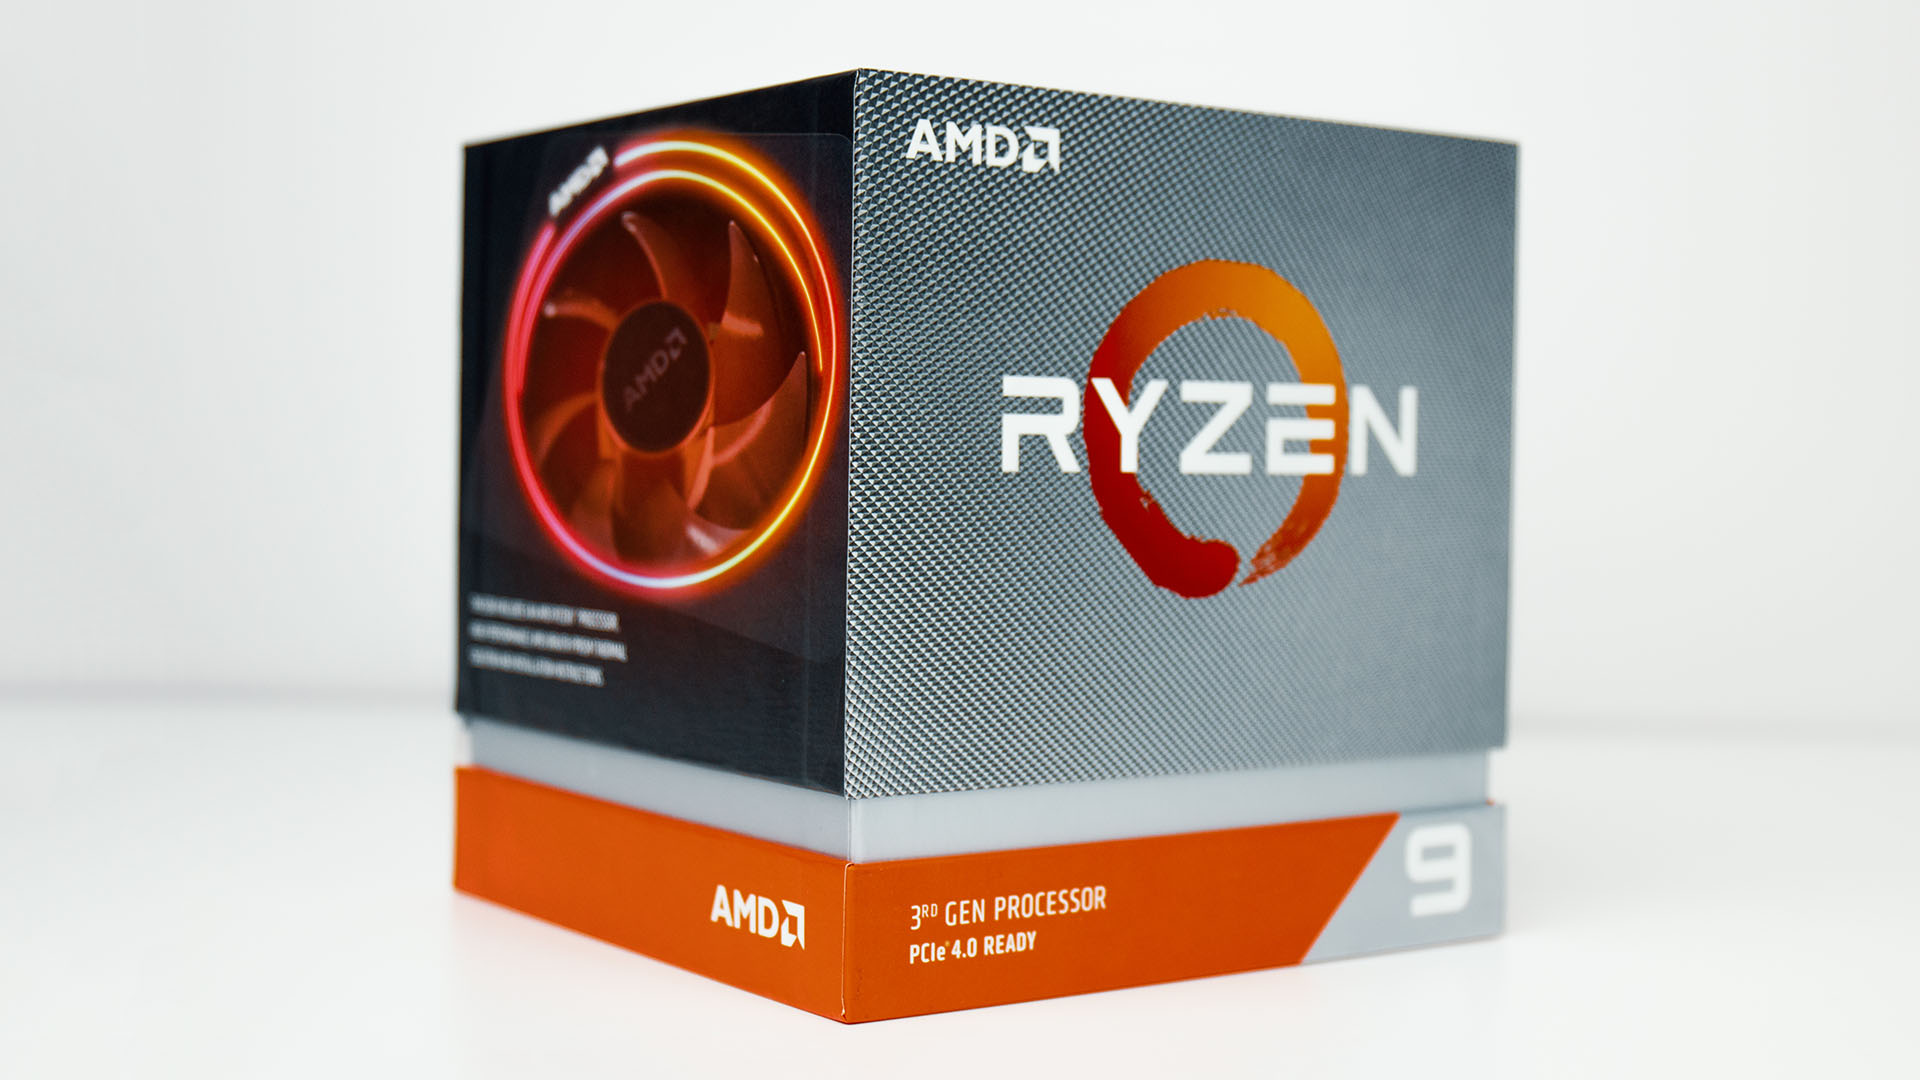 AMD's Ryzen 9 3900X is now only $420 – a response to Intel's Core 